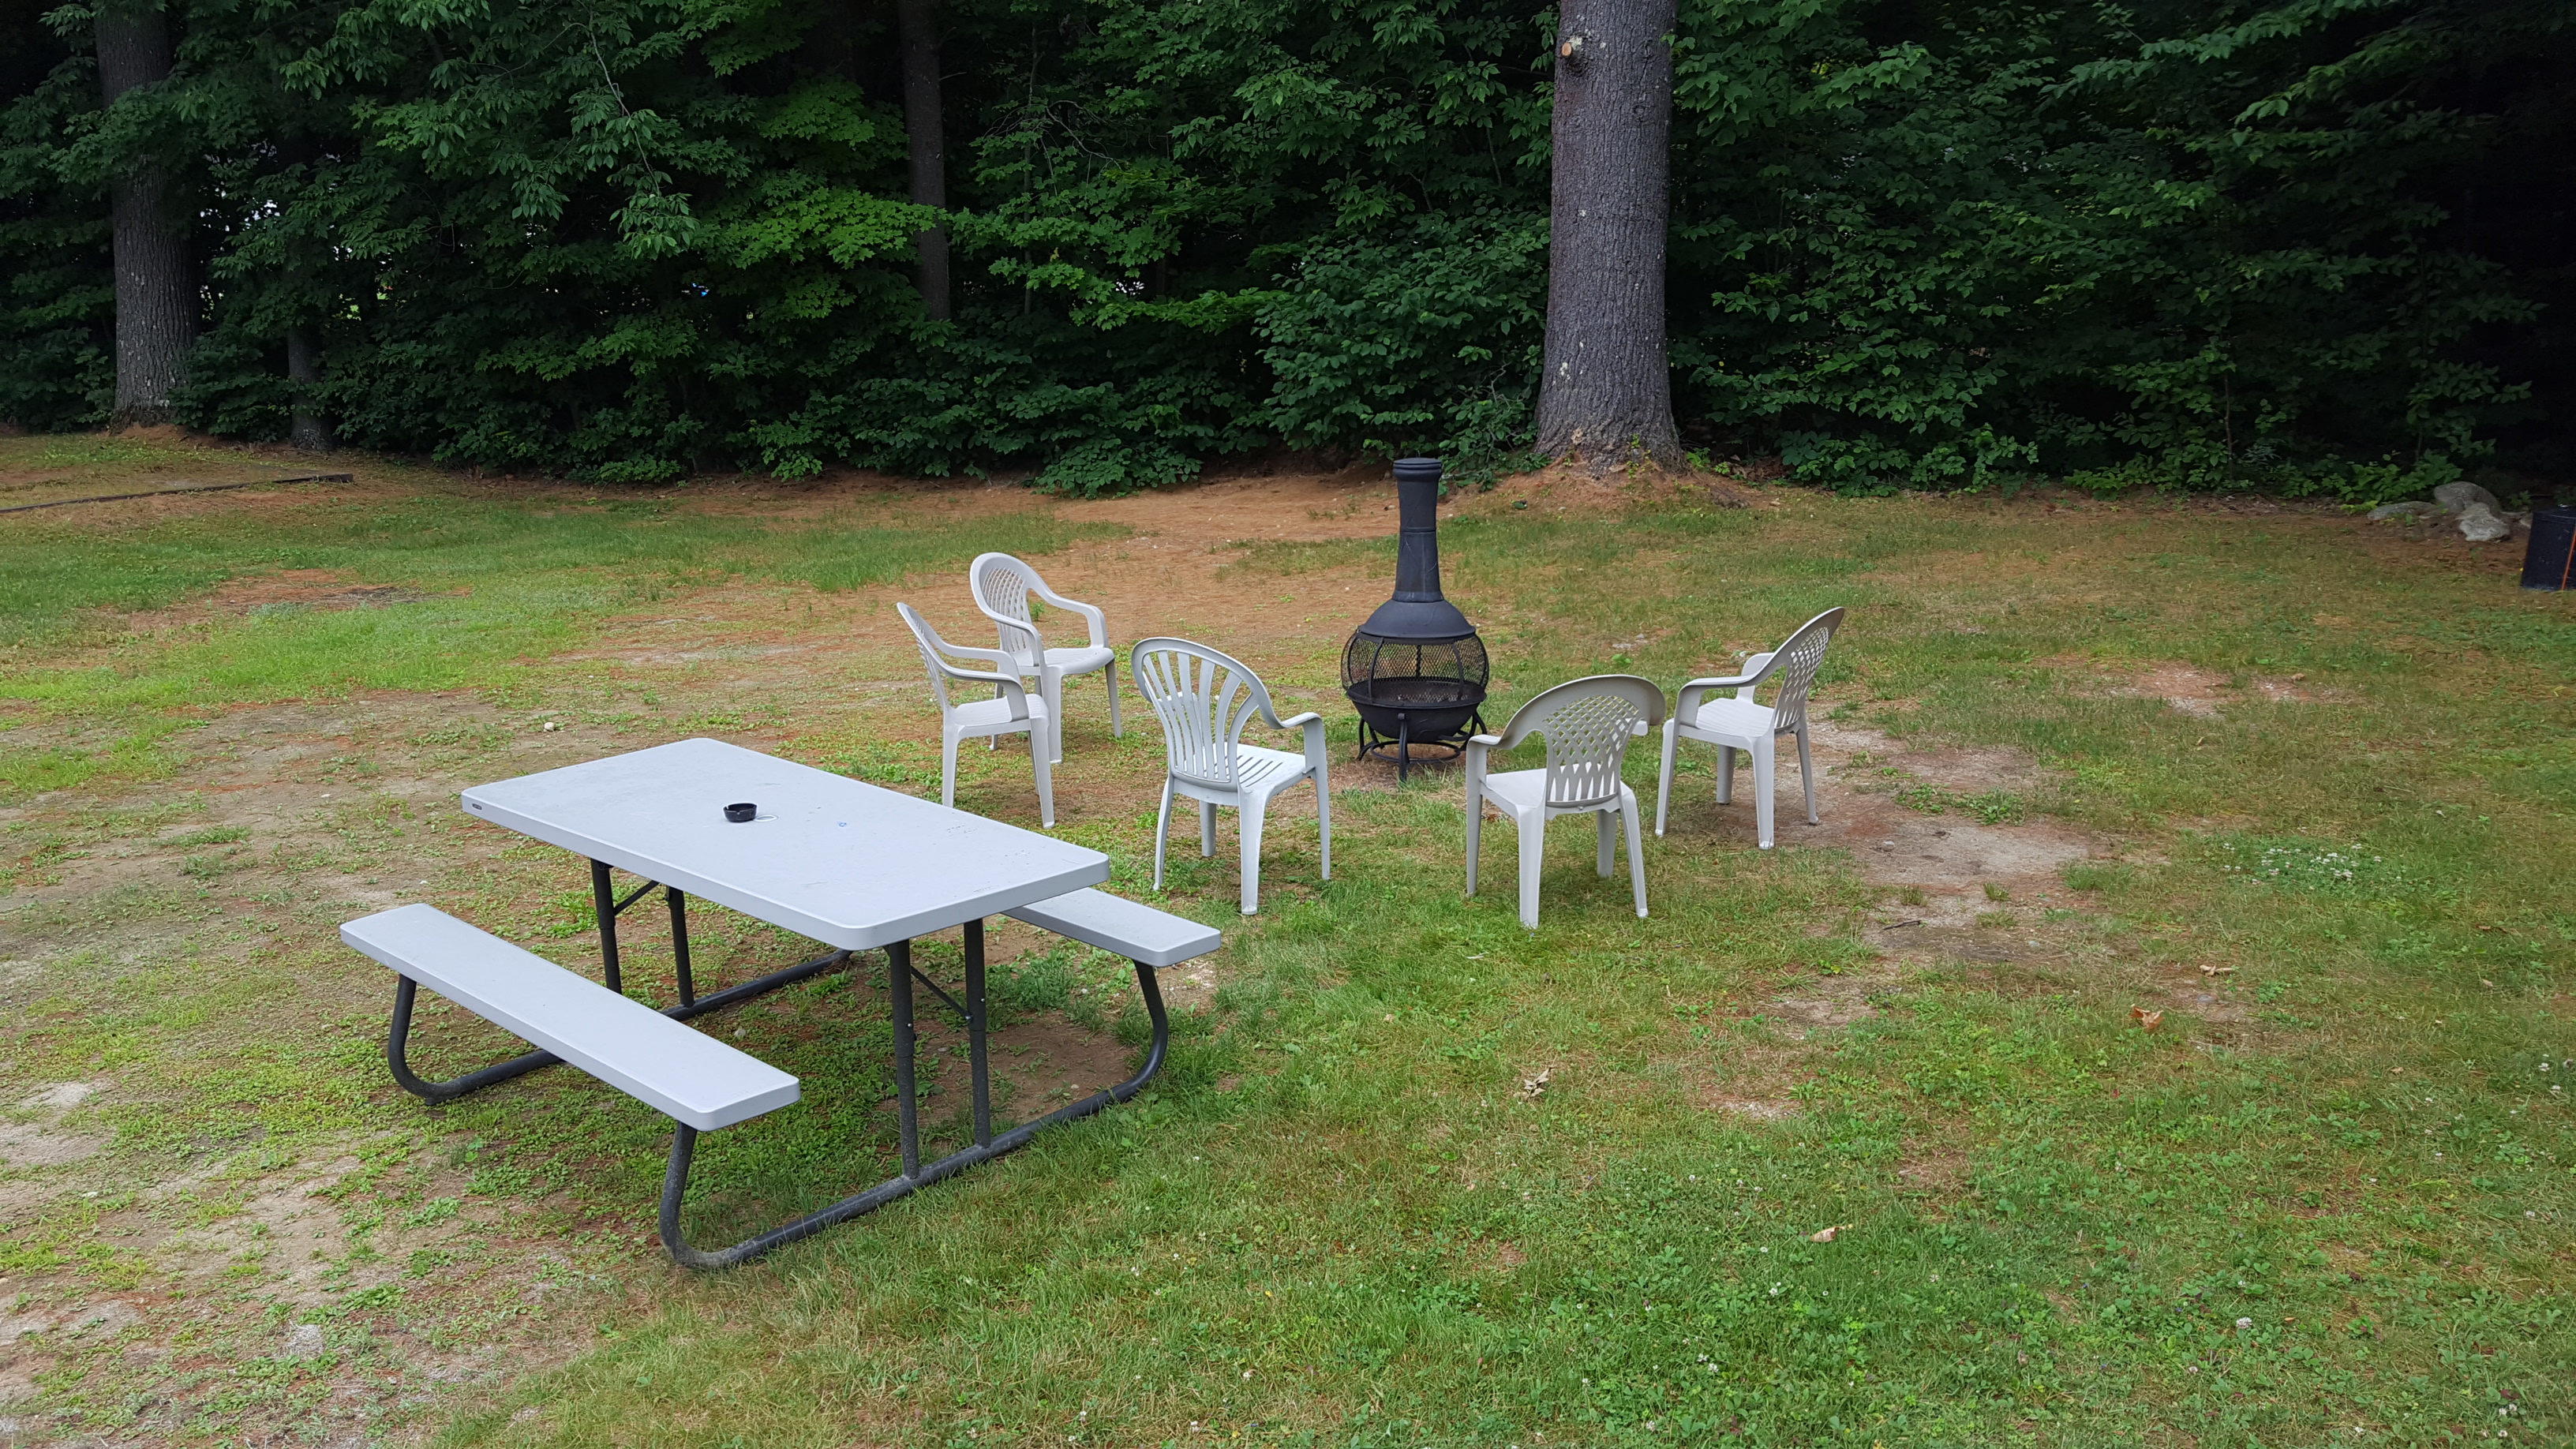 Picnic table and patio chairs around a wood stove